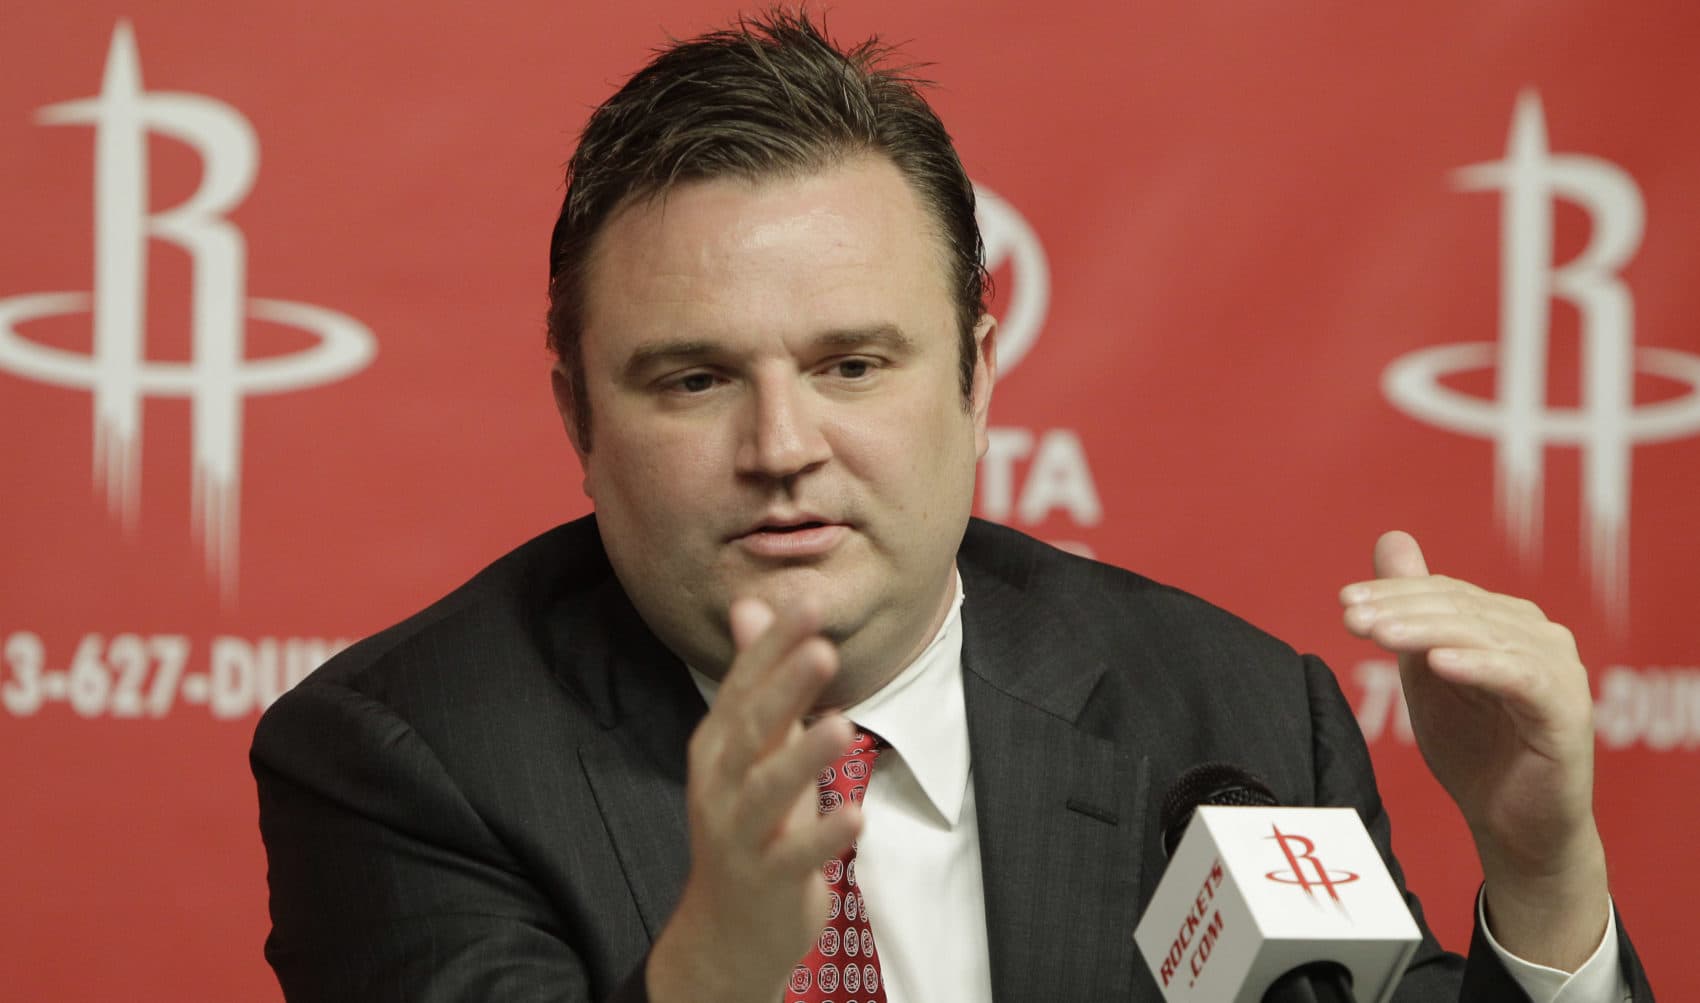 Before China Uproar, NBA's Daryl Morey Was Known For Sports Analytics At MIT